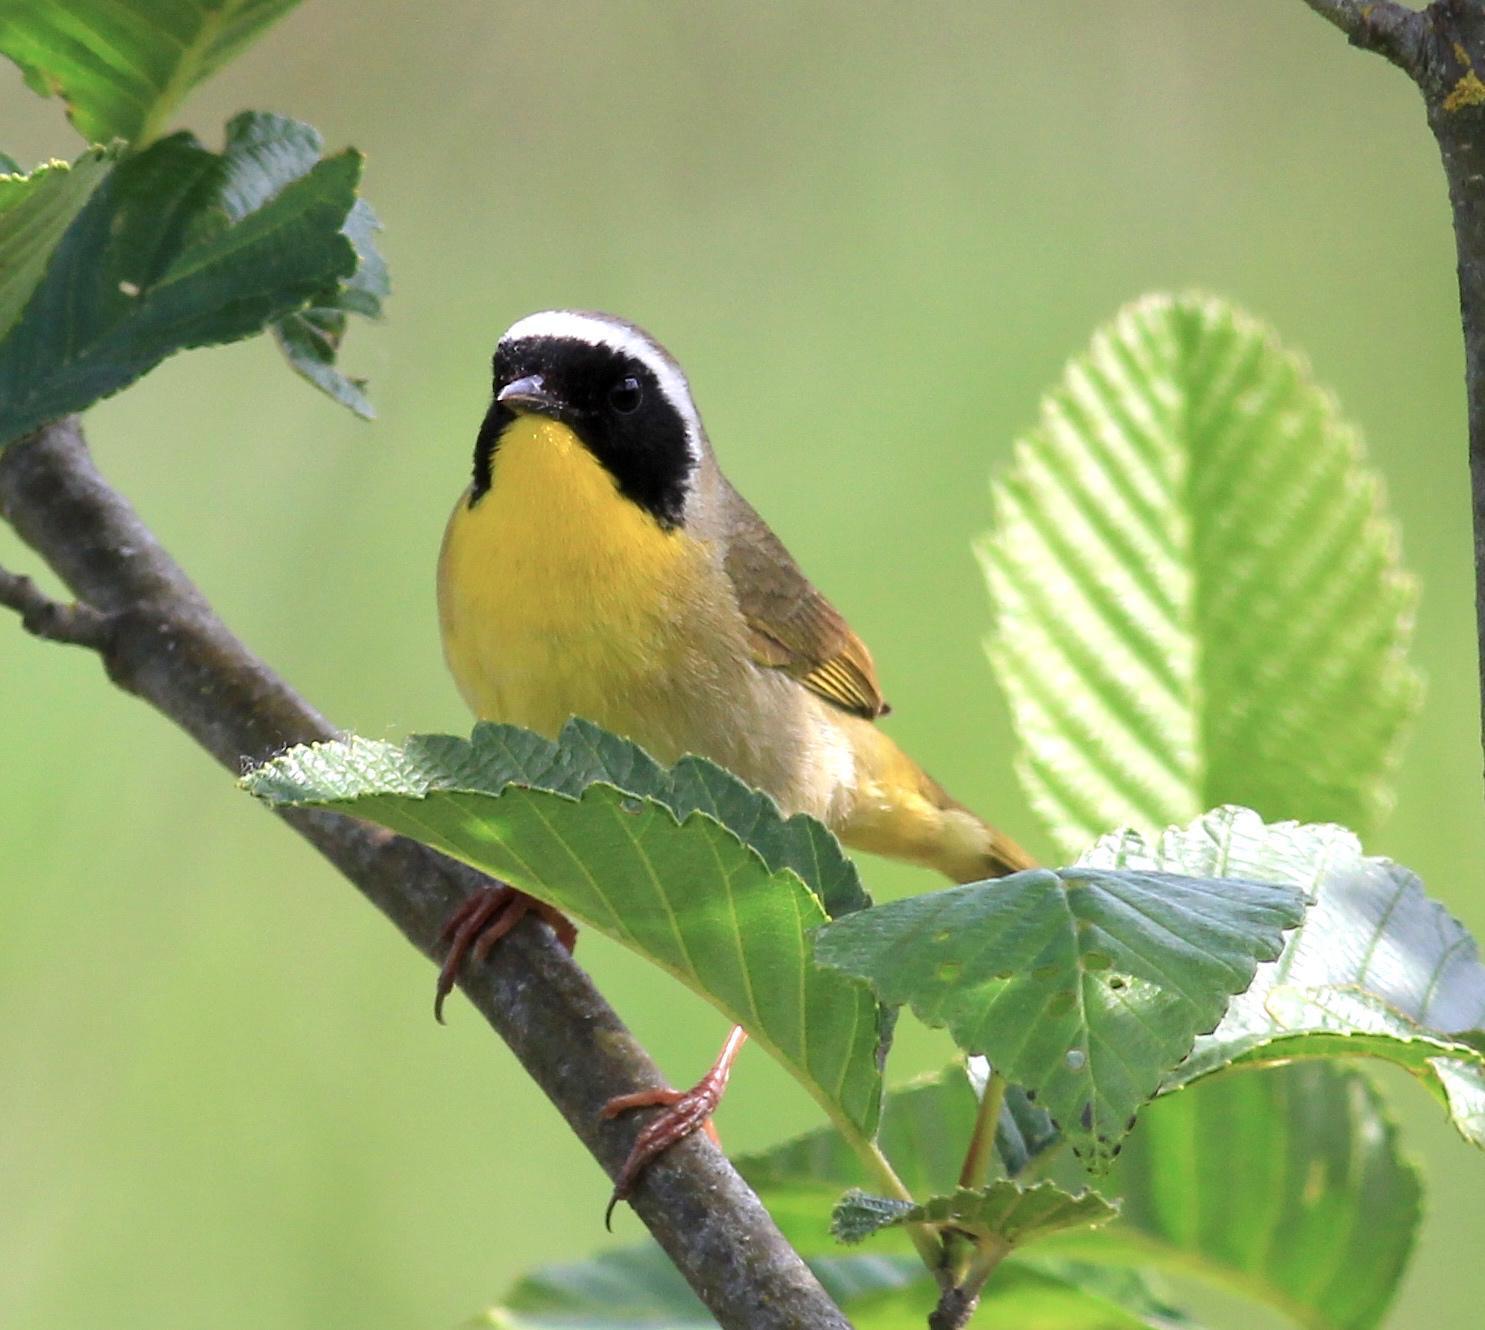 Common Yellowthroat Photo by Kathryn Keith